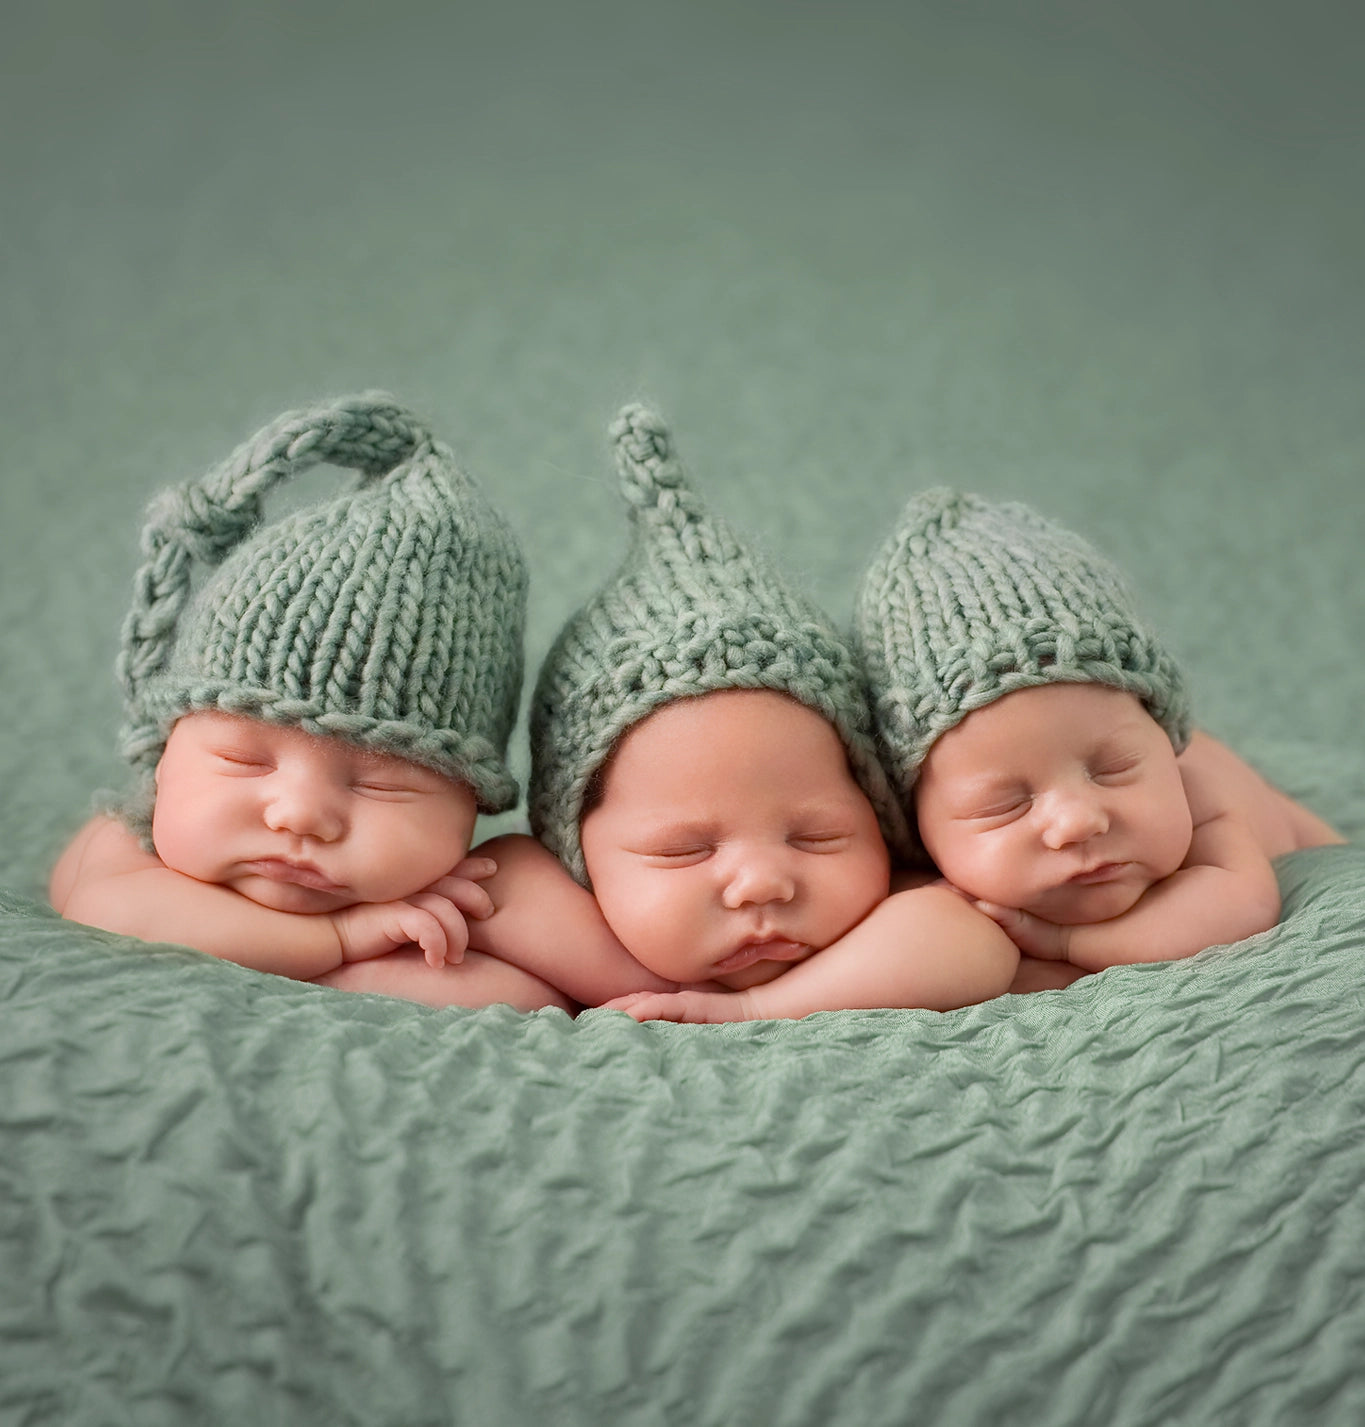 Newborn Photoshop Actions for Photographers